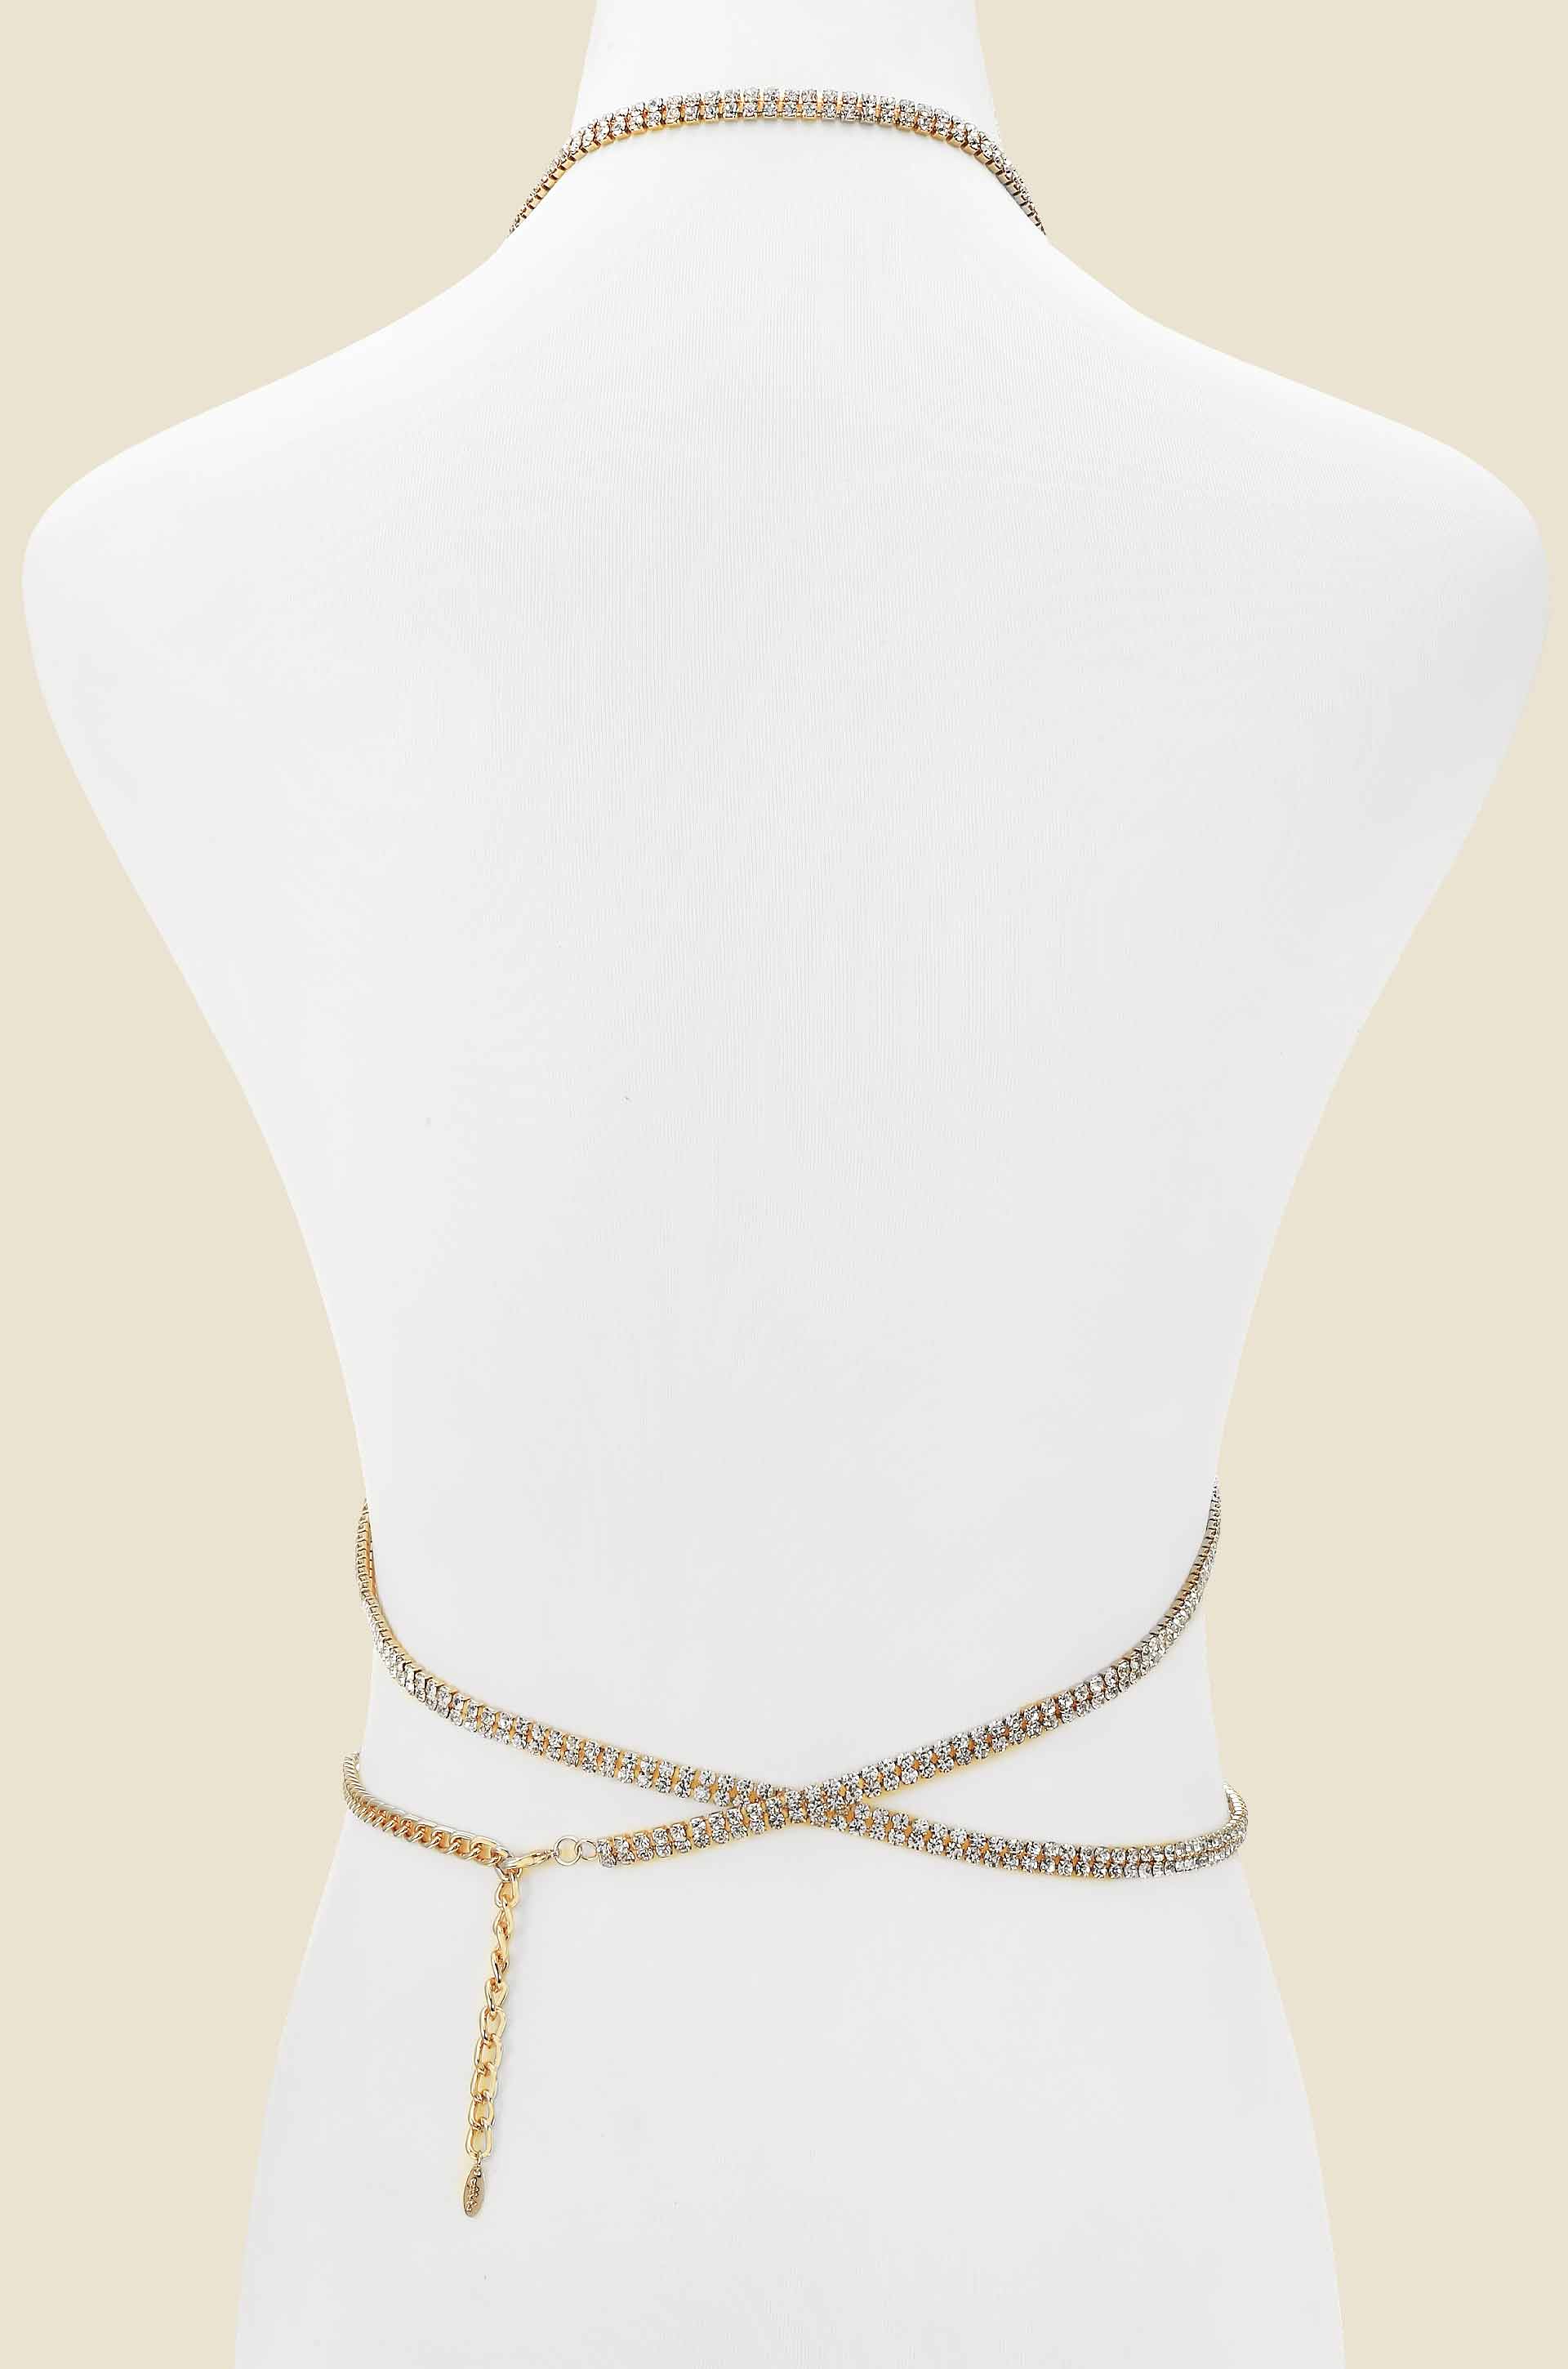 chanel chain belt outfit